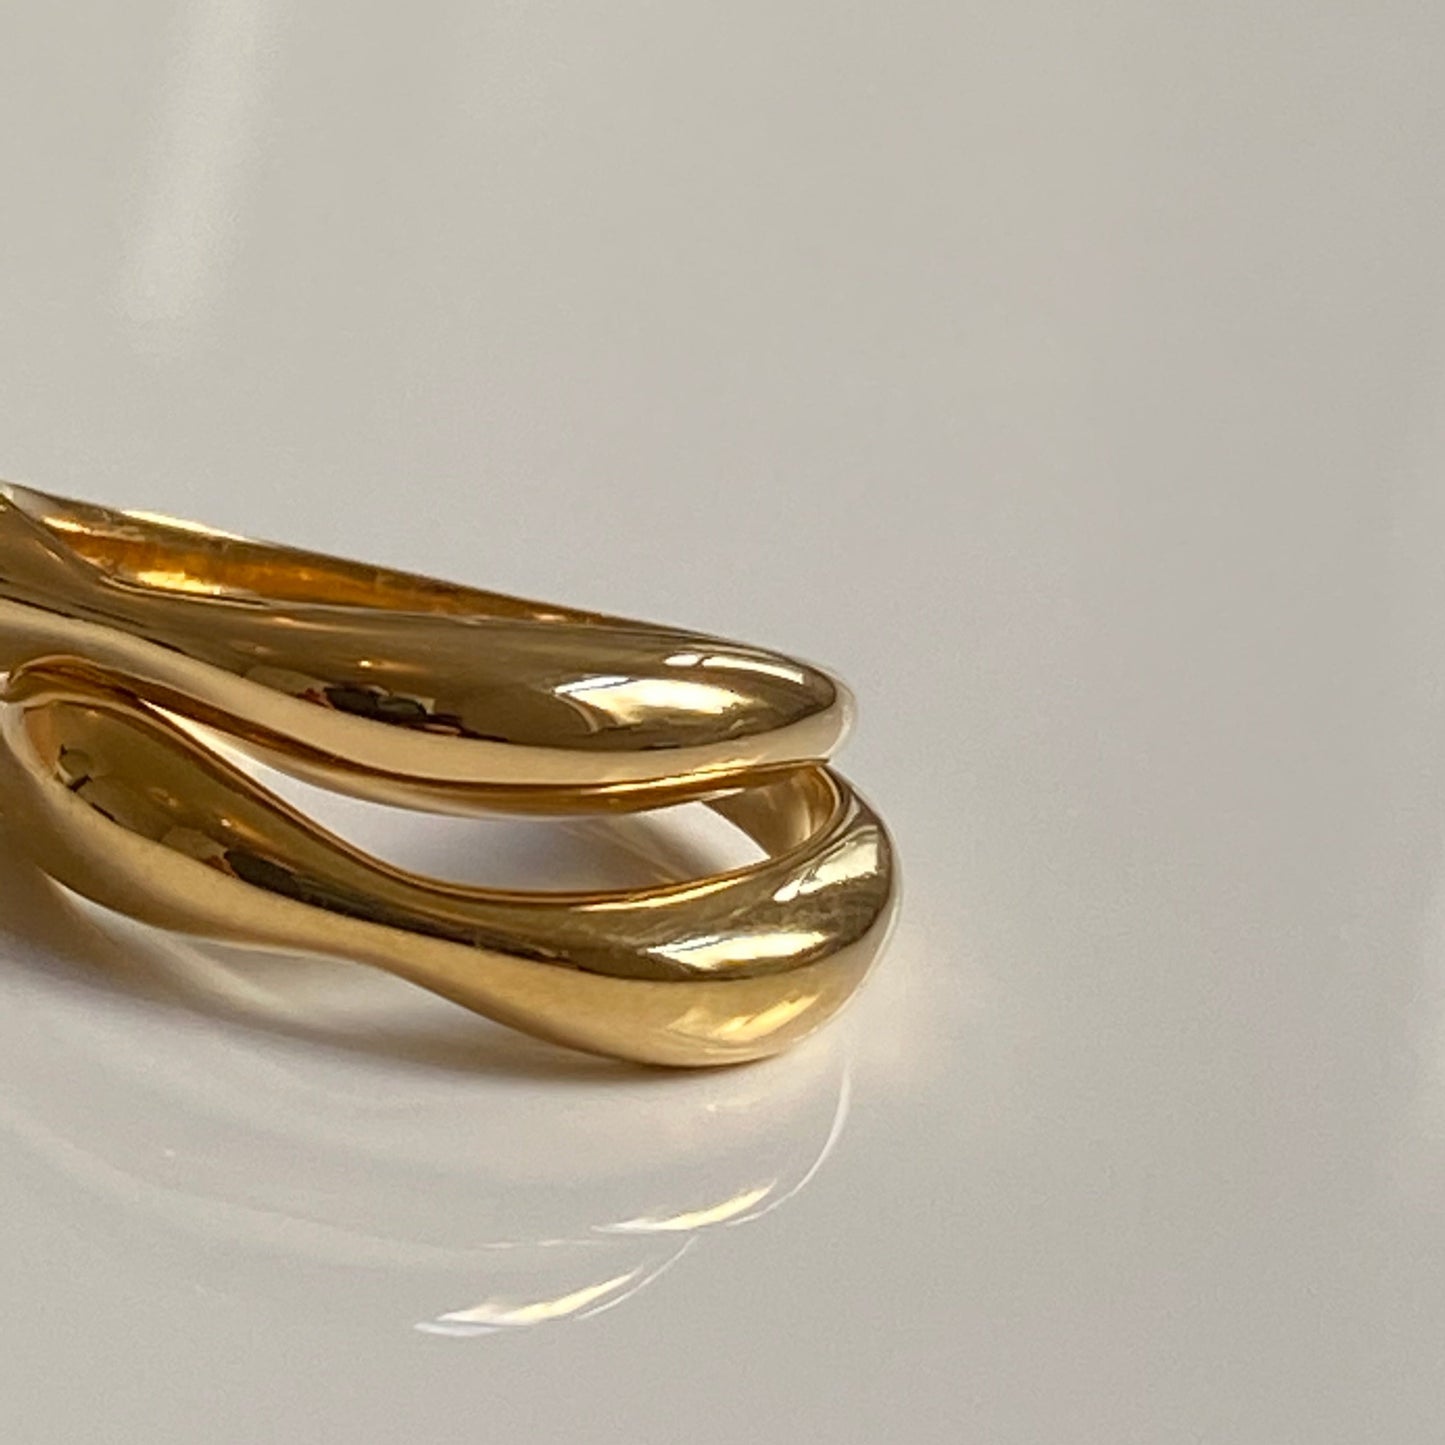 THE DOUBLE TROUBLE SET - Solid 14k yellow gold